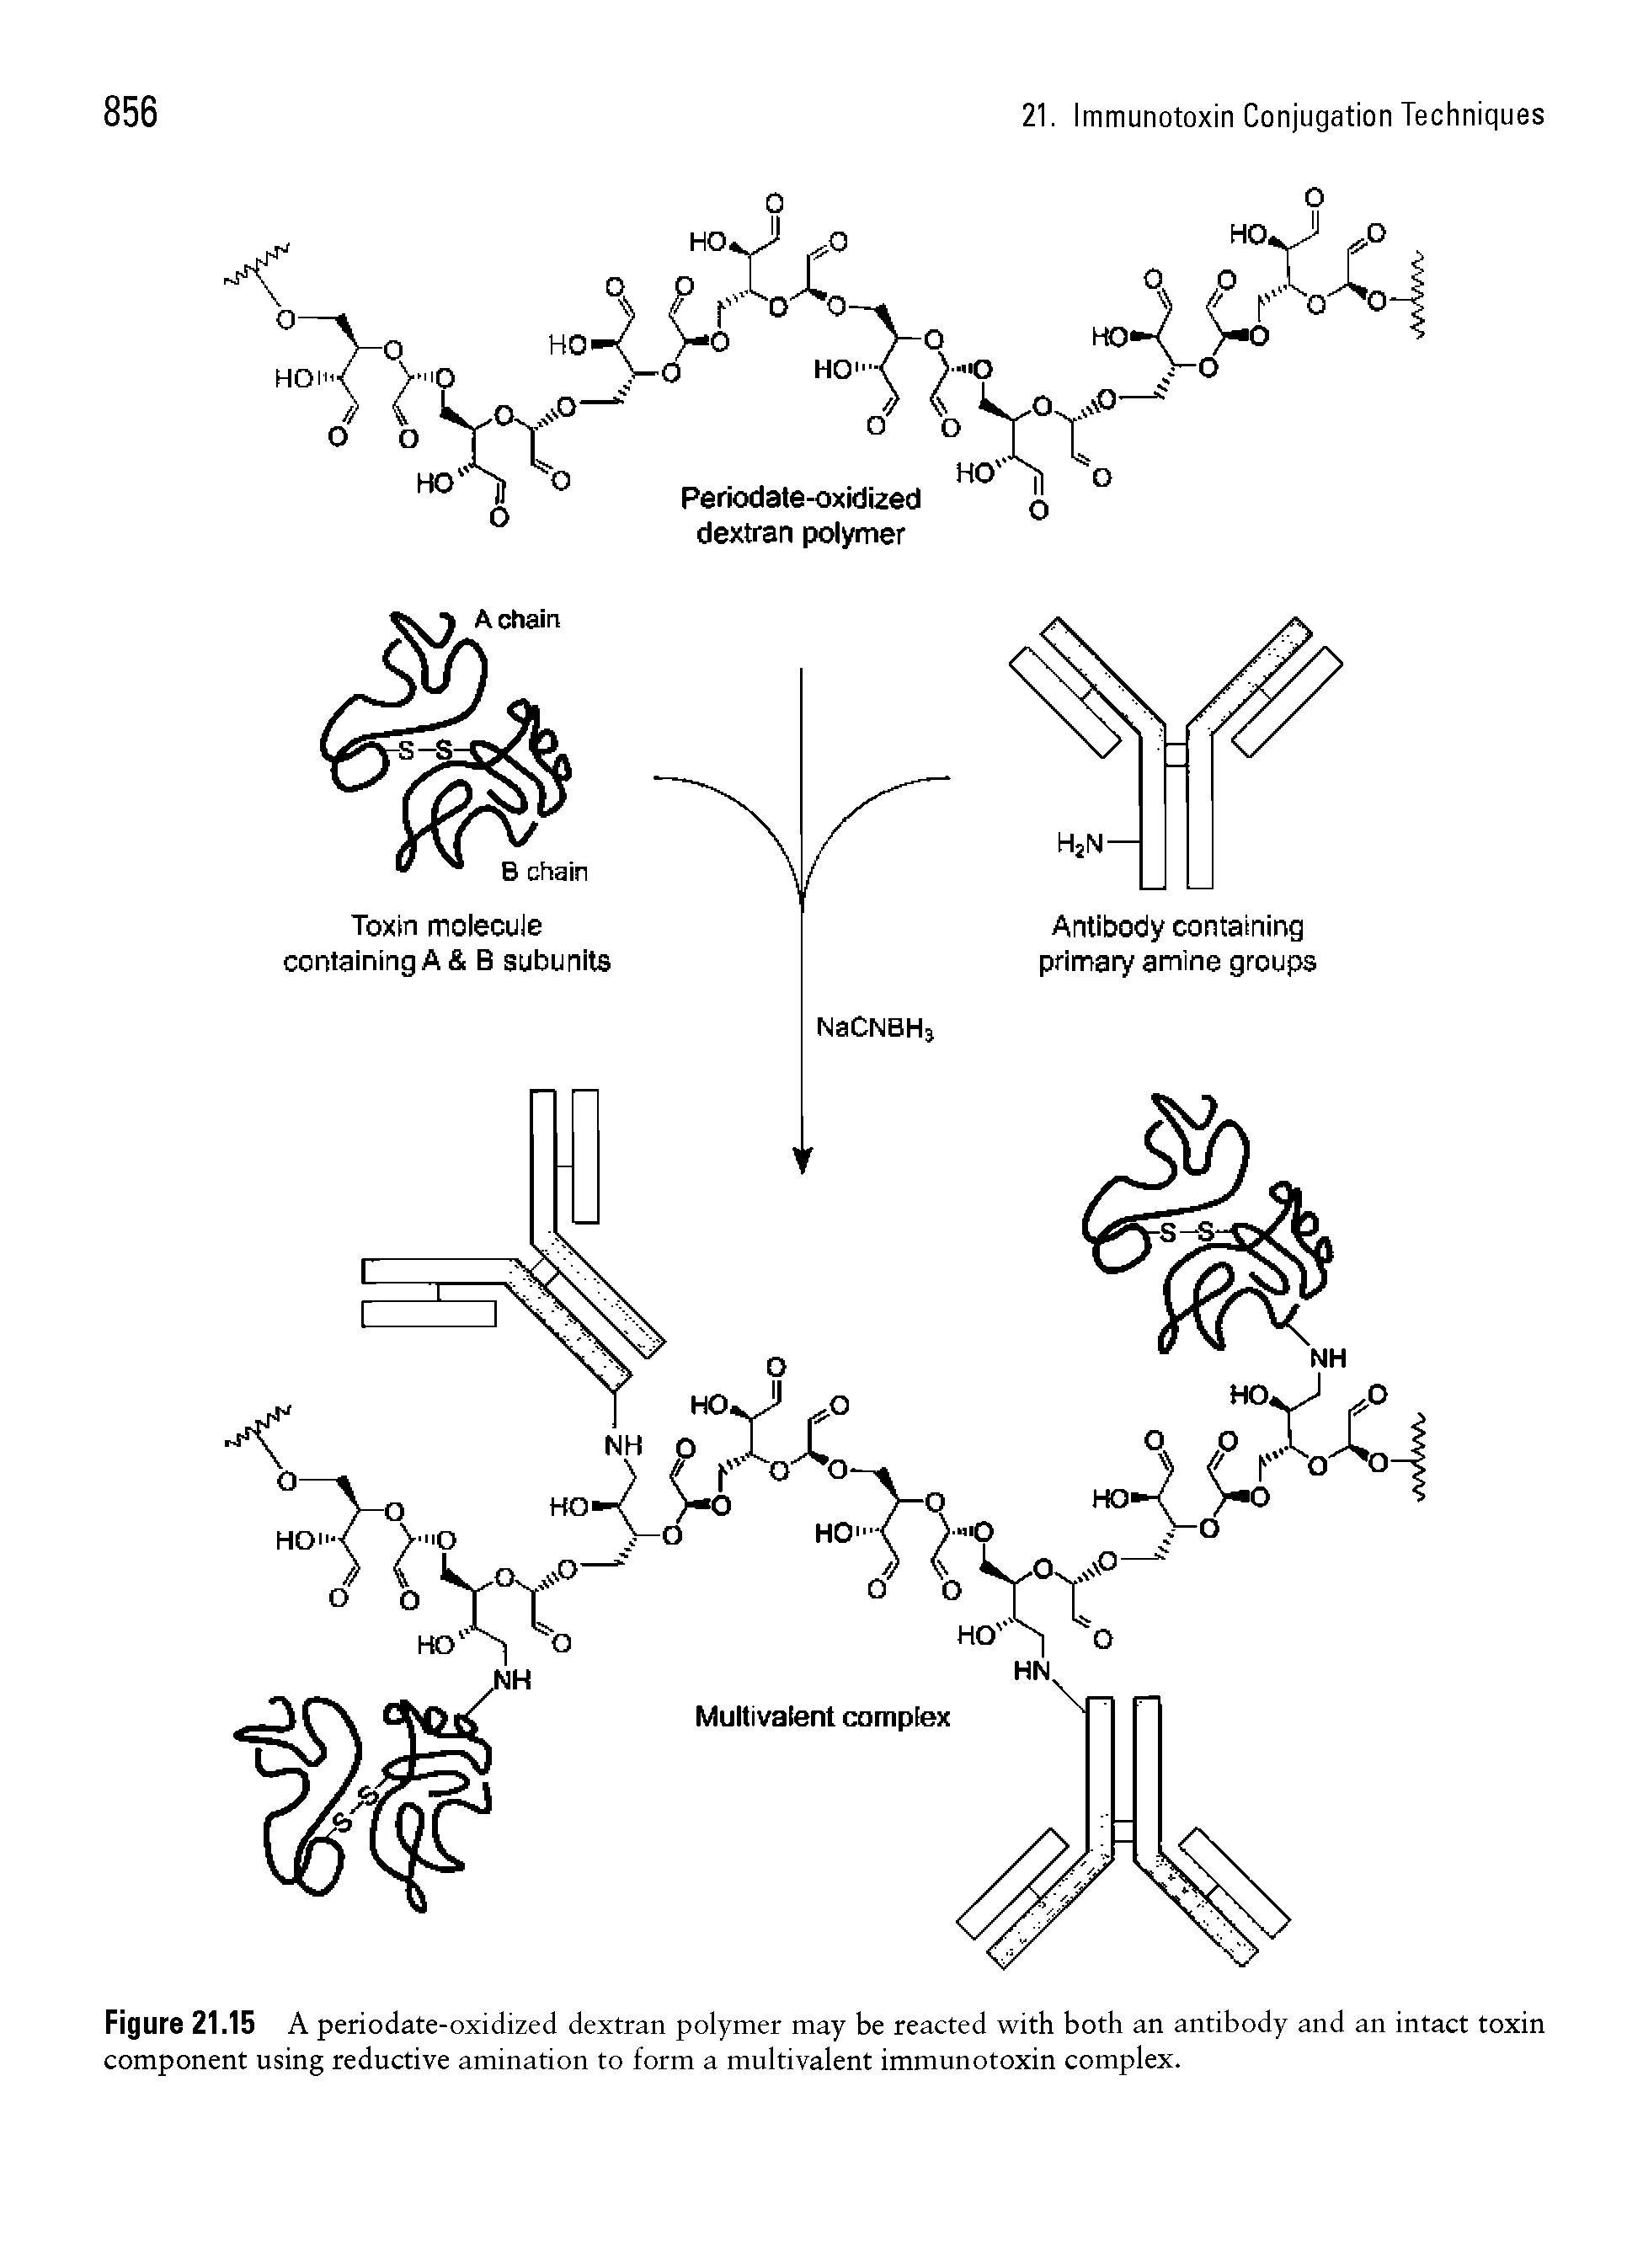 Figure 21.15 A periodate-oxidized dextran polymer may be reacted with both an antibody and an intact toxin component using reductive amination to form a multivalent immunotoxin complex.